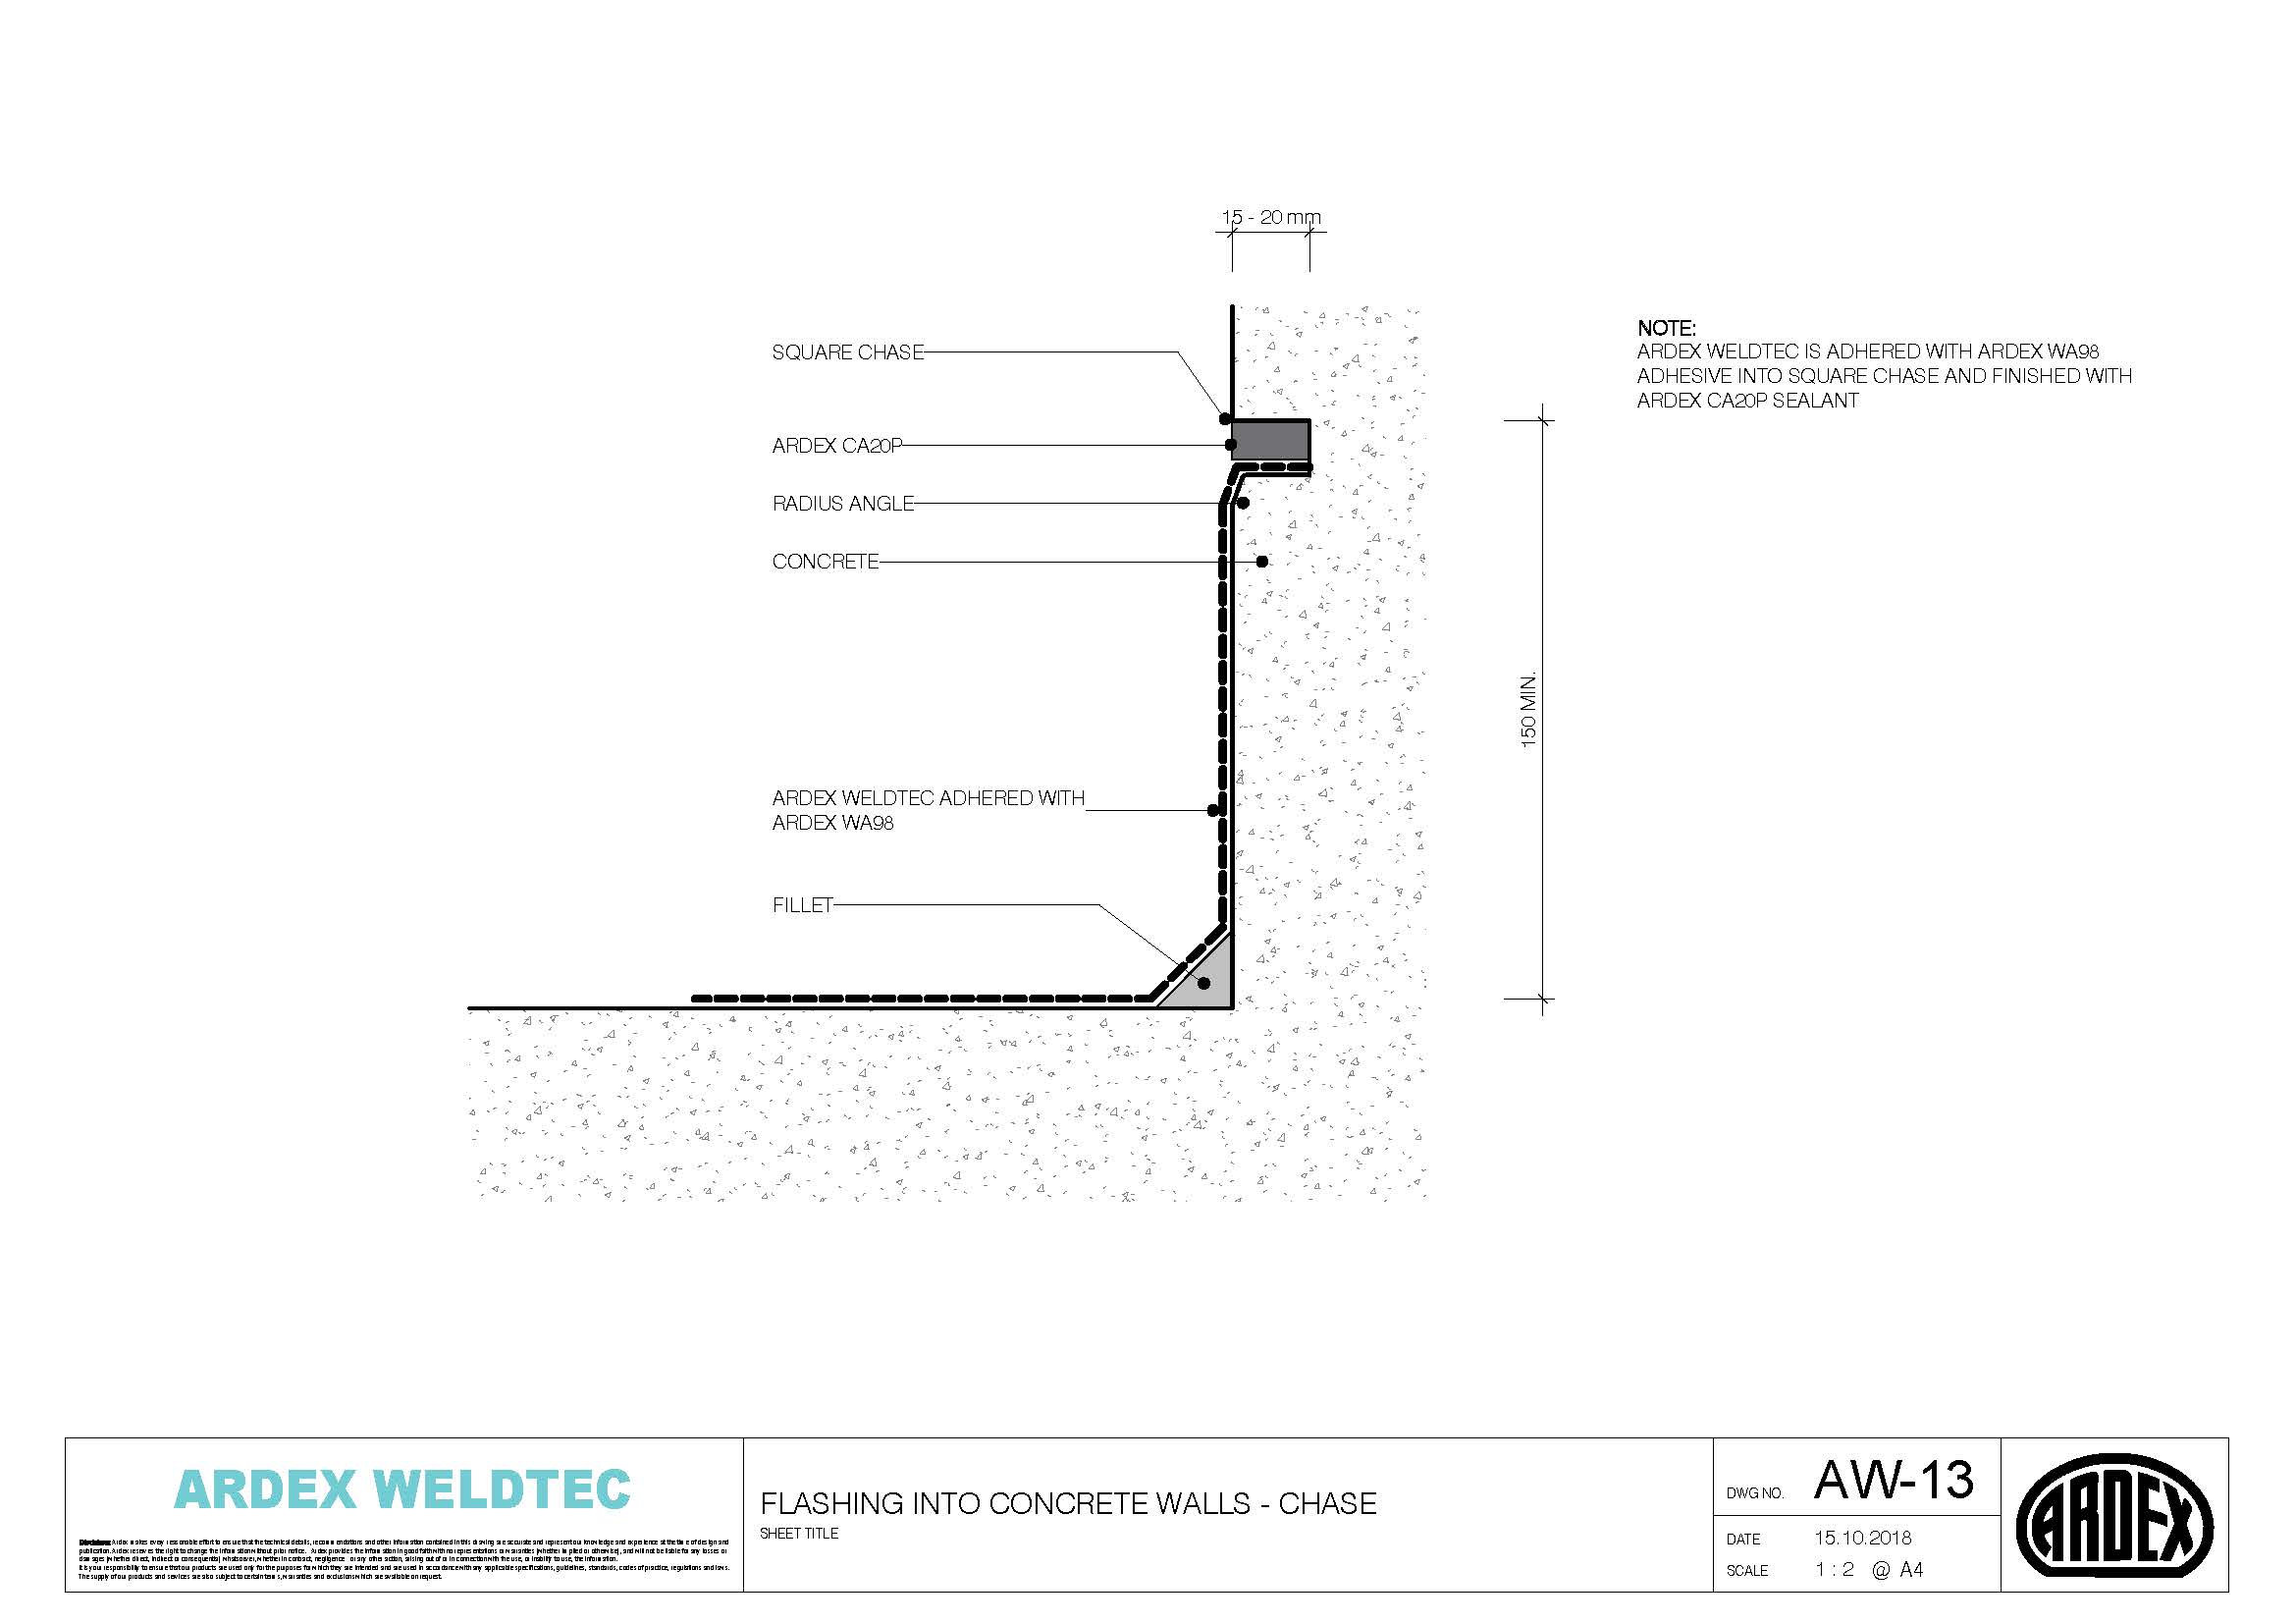 Weldtec flashing into concrete walls - chase